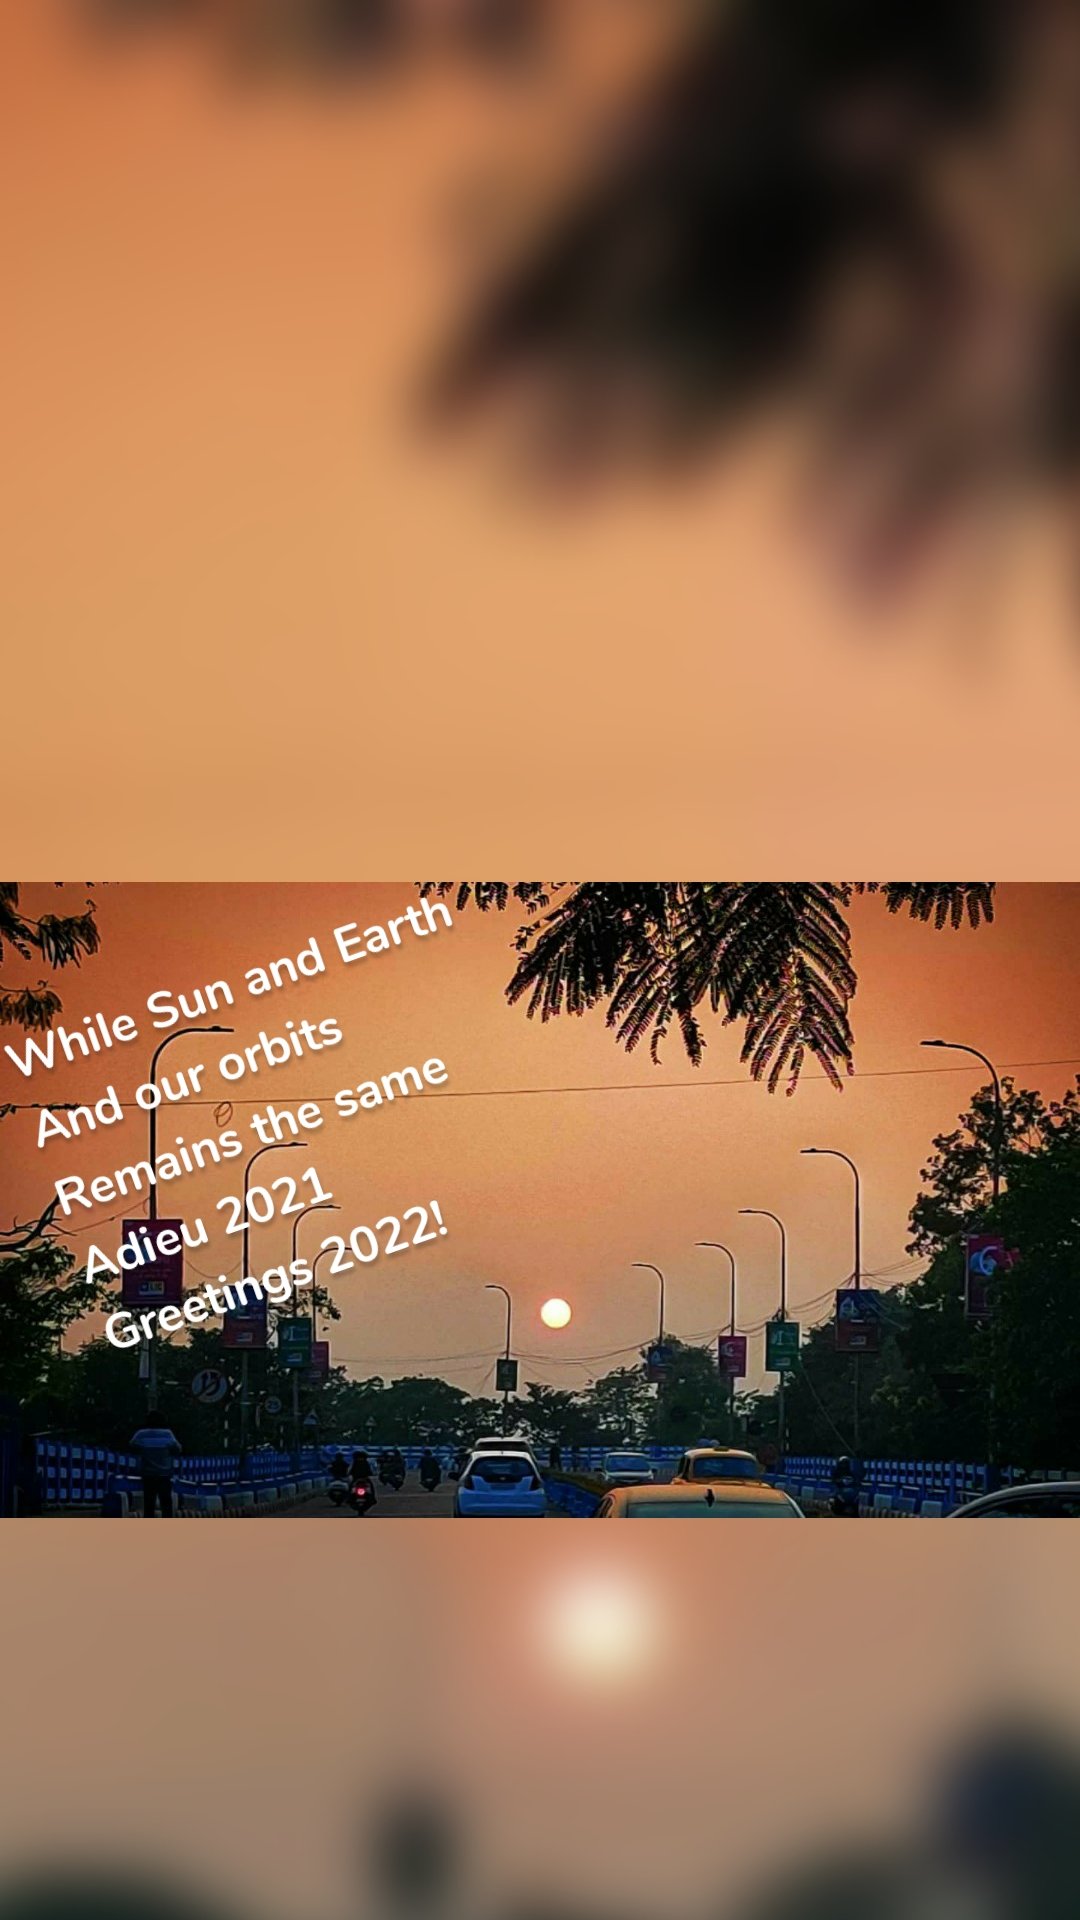 While Sun and Earth
And our orbits 
Remains the same
Adieu 2021
Greetings 2022! 